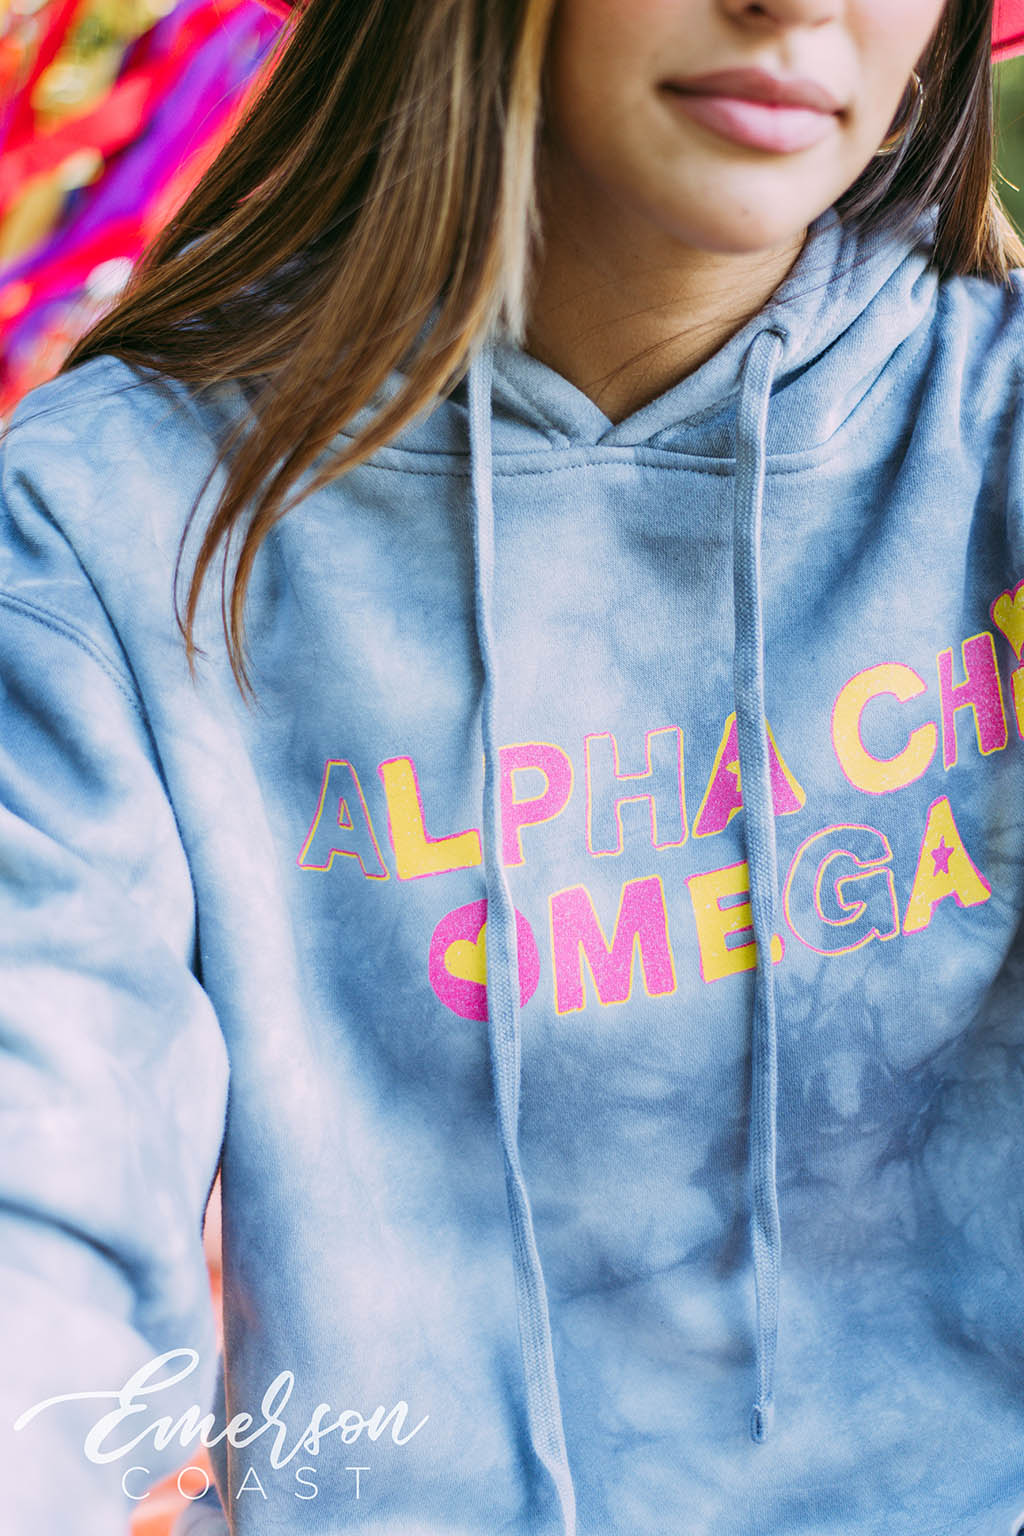 Alpha Chi Omega Silver Linings Hoodie